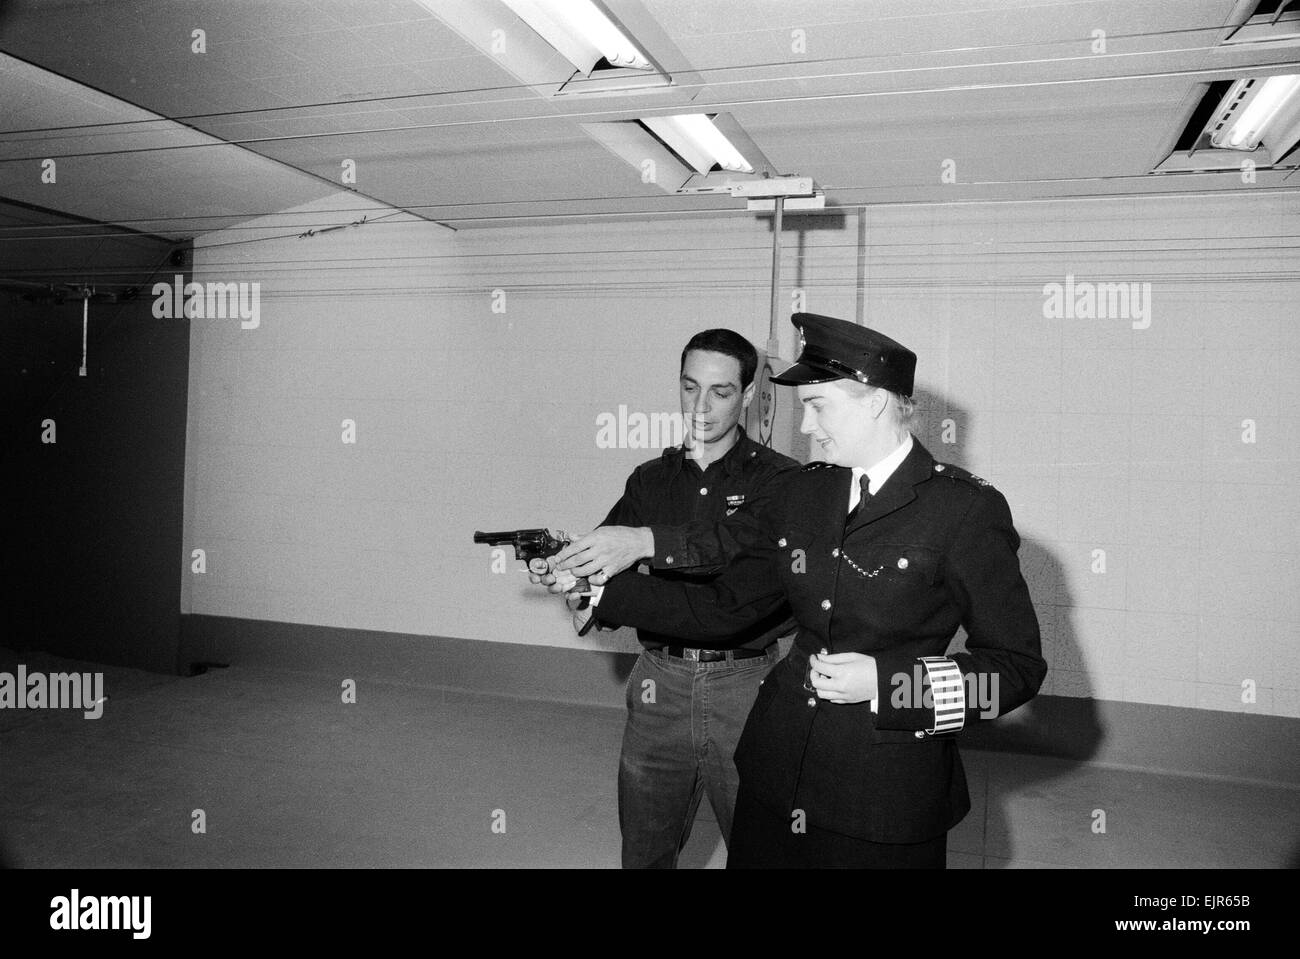 English police officers tour a firing range at a New York Police Department in America 2nd October 1964. Bobby is shown, by Instructor, how to hold a gun correctly *** Local Caption *** WatScan - - 05/01/2010 Stock Photo